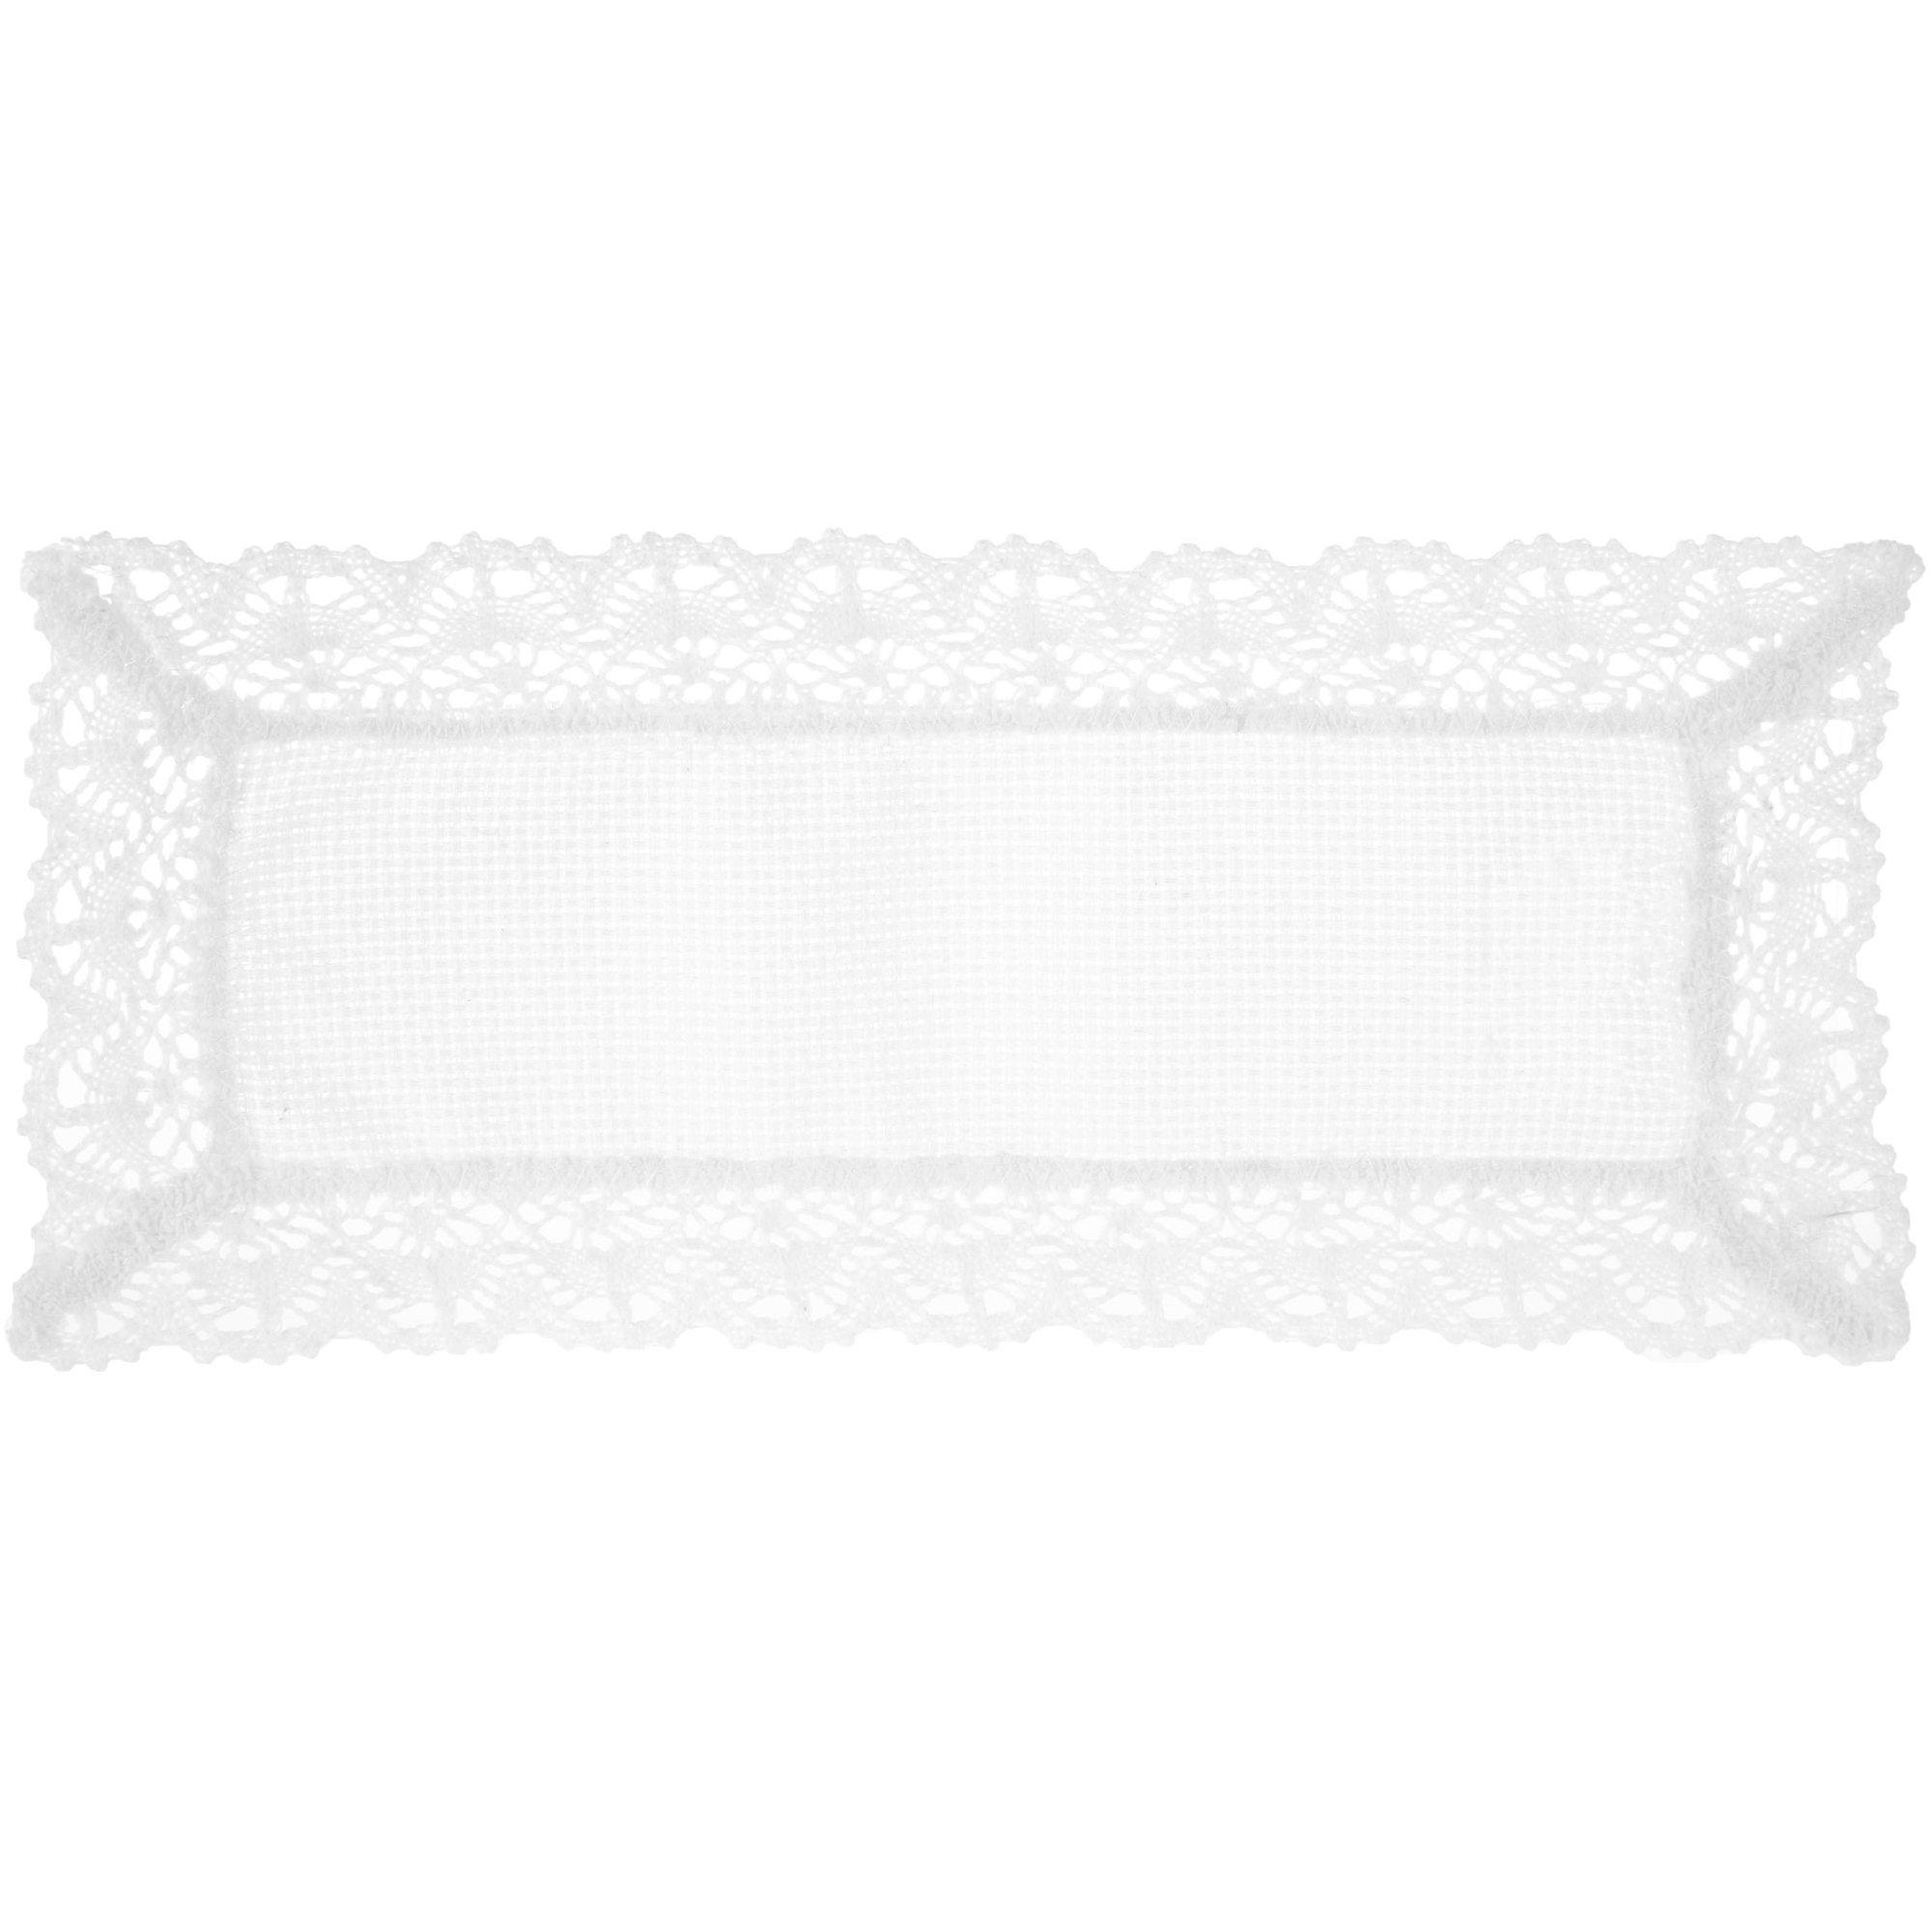 Scalloped Punched Cross Stitch Bookmarks, Hobby Lobby